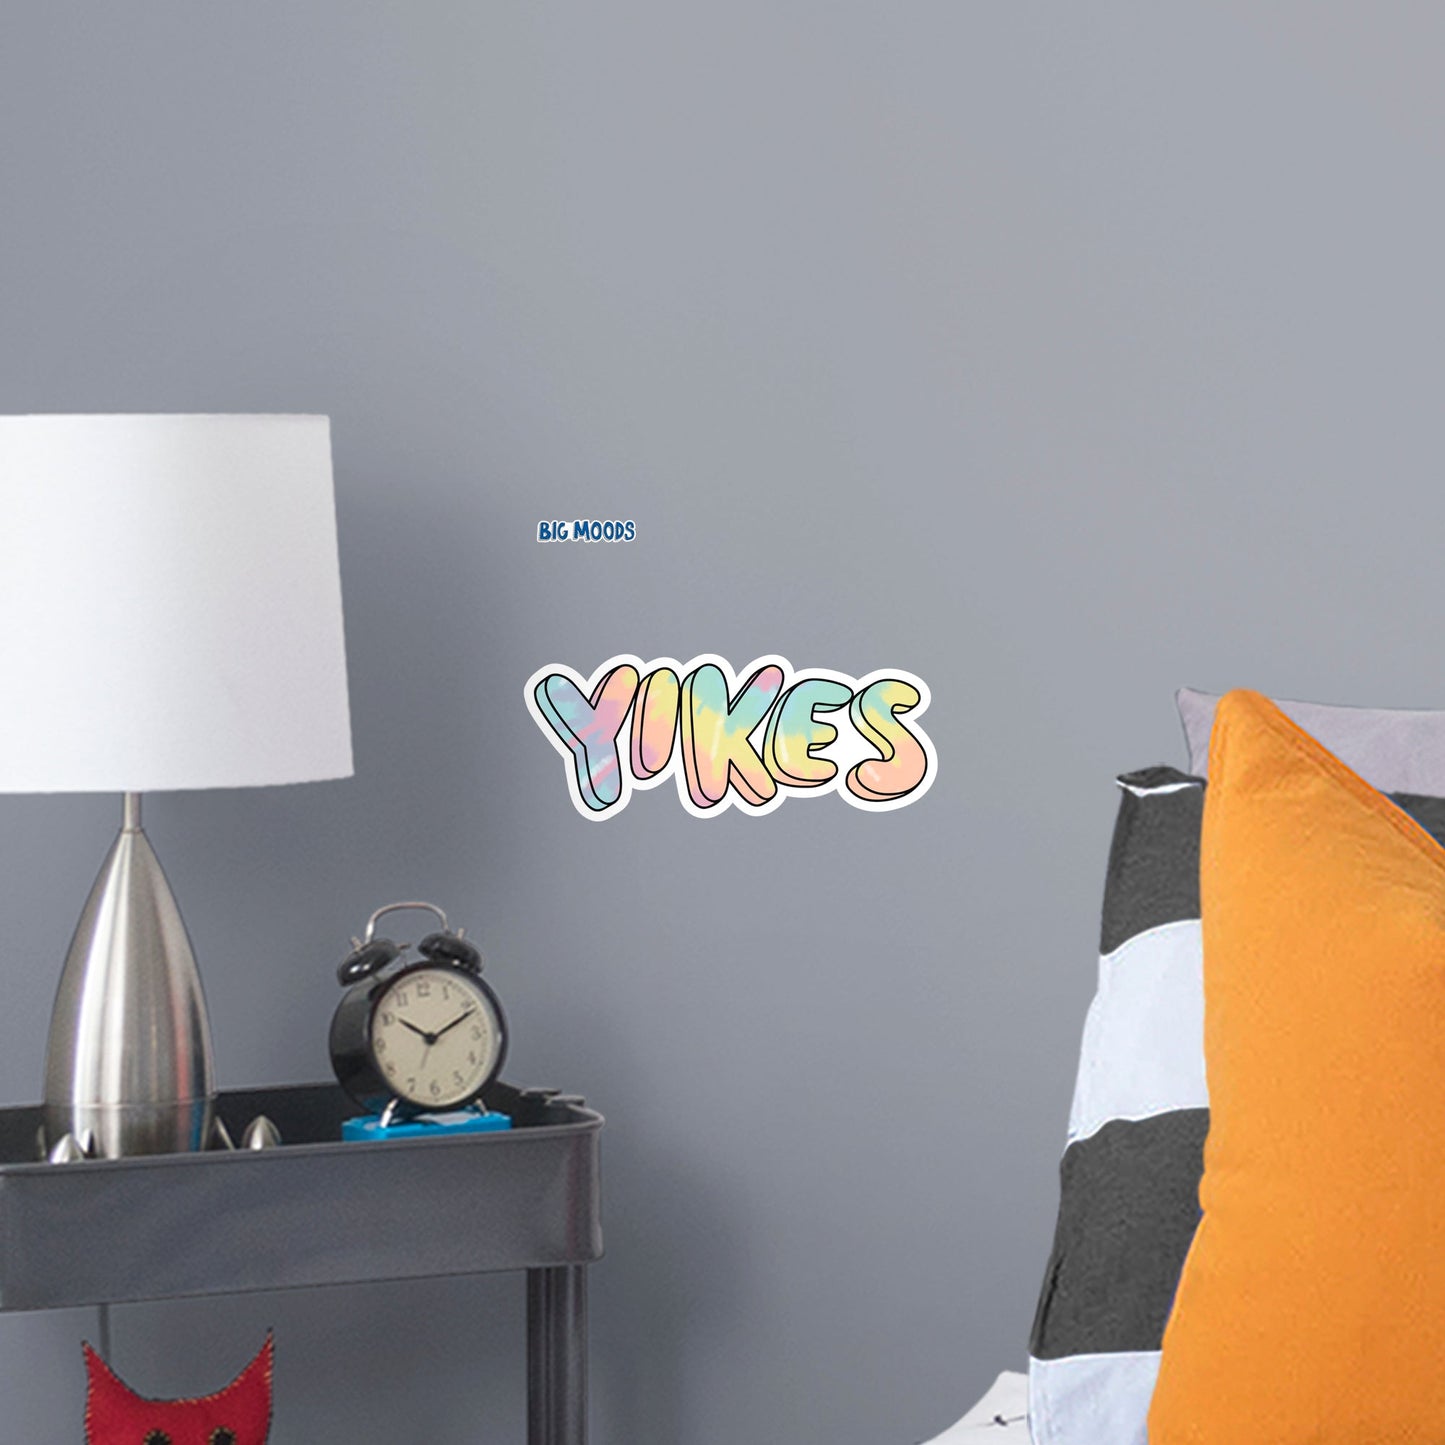 Yikes (Tie-Dye)        - Officially Licensed Big Moods Removable     Adhesive Decal